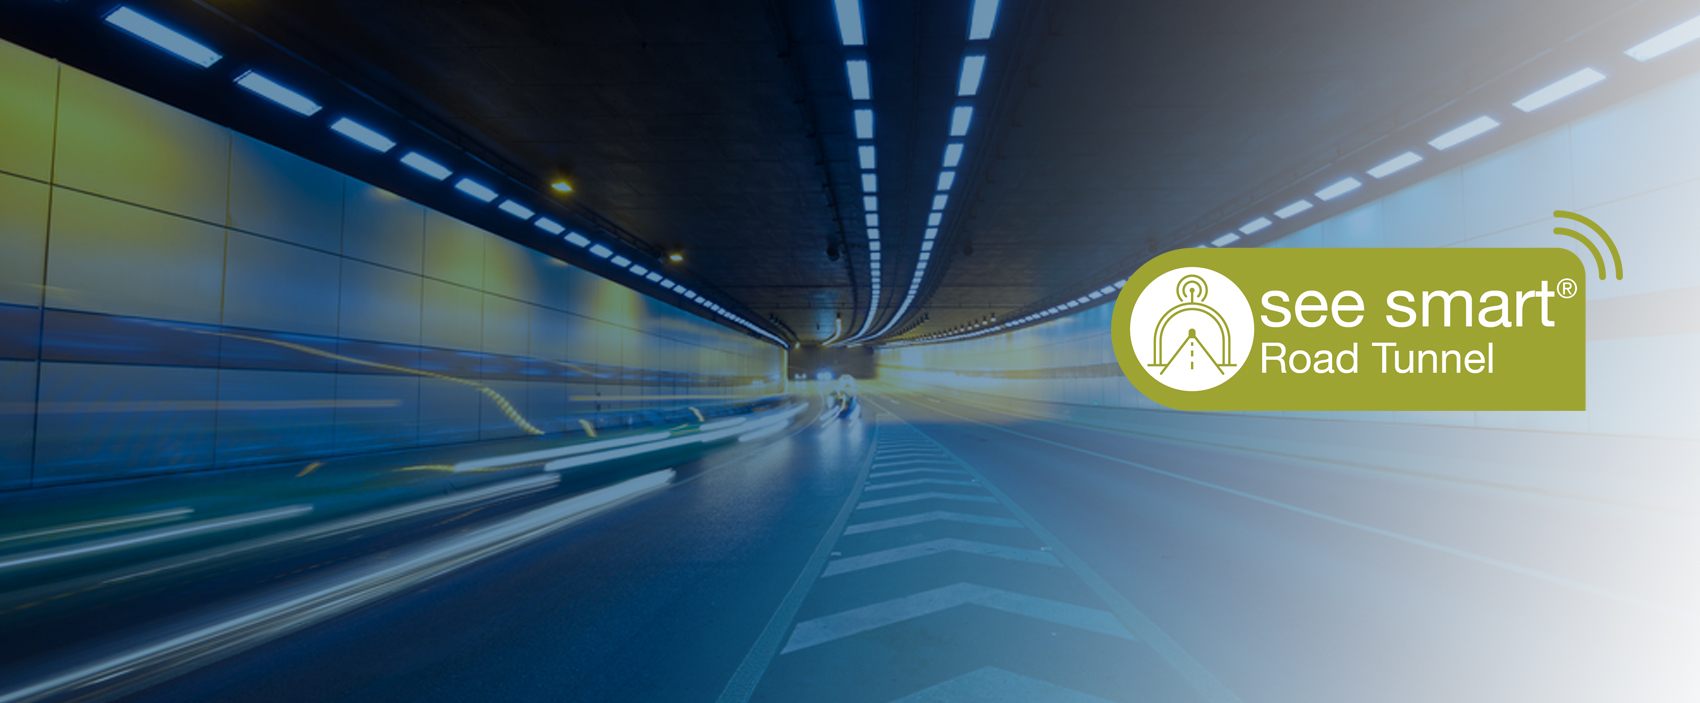 see smart Road Tunnel is an innovative approach of bringing reliable radio coverage to road tunnels